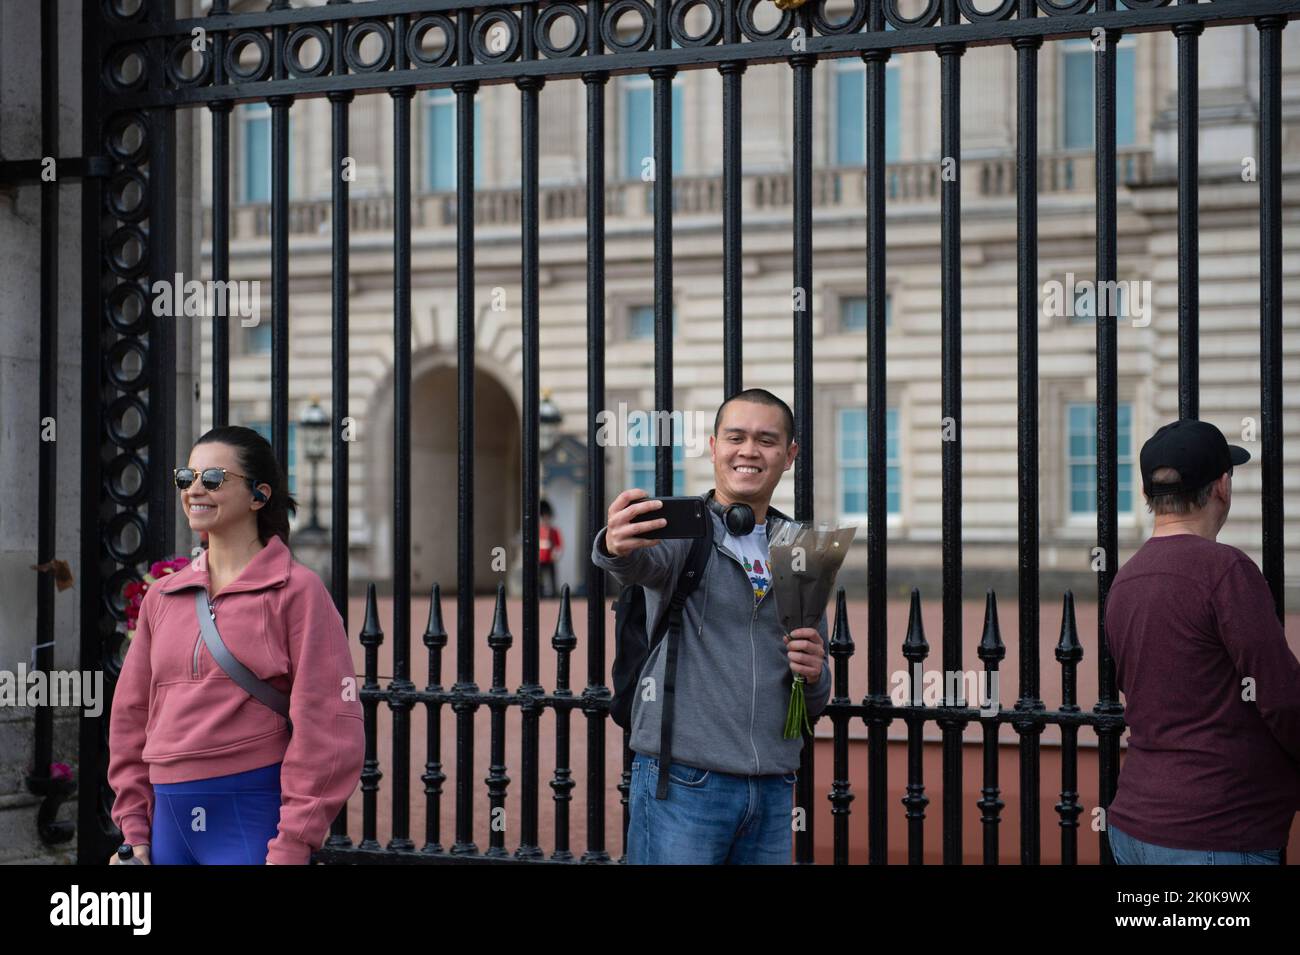 UK. 12th Sep, 2022. Mourners pose for photographs and selfies outside the gates of Buckingham Palace in London, UK on September 12, 2022. Queen Elizabeth II died on September the 8, 2022 at Balmoral Castle and is succeeded by her eldest son, King Charles III. (Photo by Claire Doherty/Sipa USA) Credit: Sipa USA/Alamy Live News Stock Photo